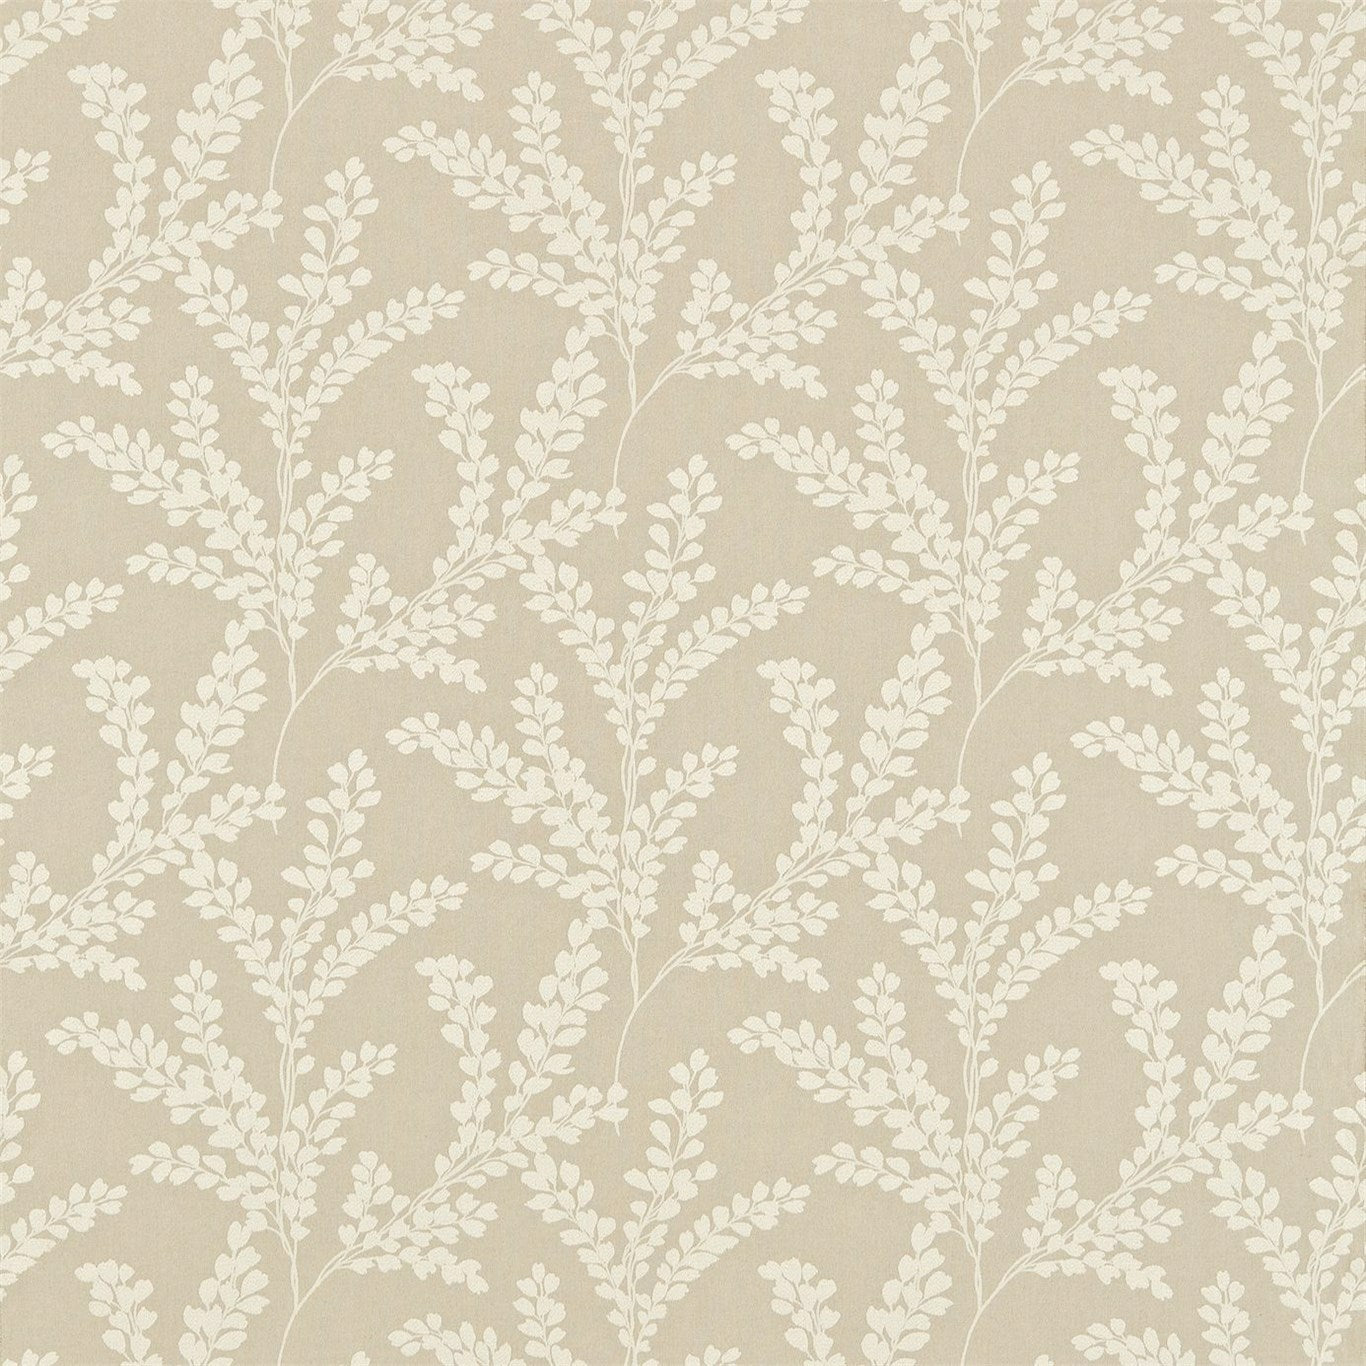 Clovelly Fabric by Sanderson - DCLO232057 - Silver